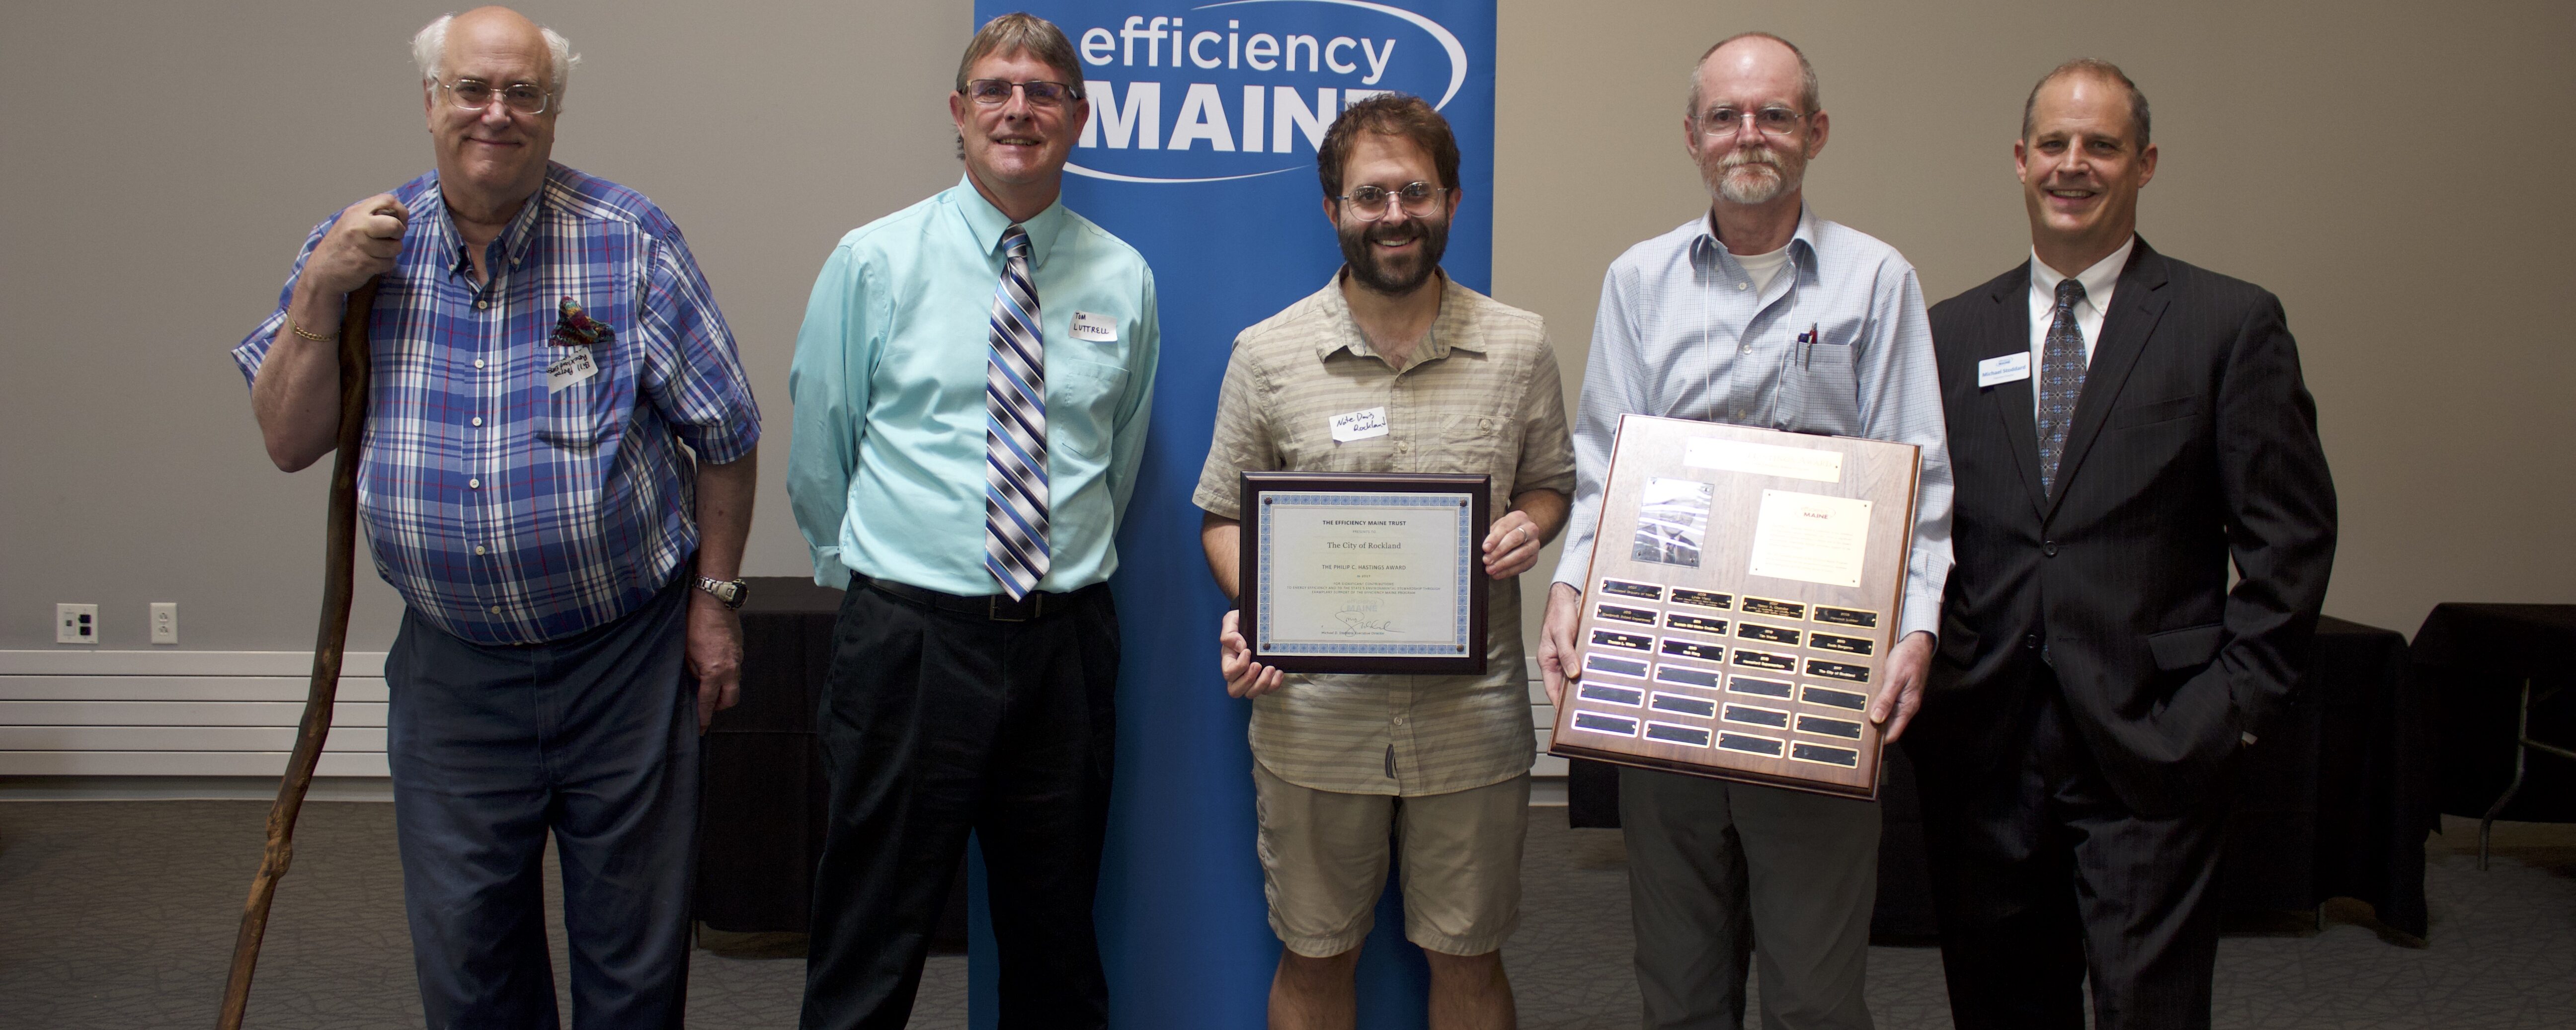 Rockland Receives Energy Award and Schedules Community Energy Forum for September 26